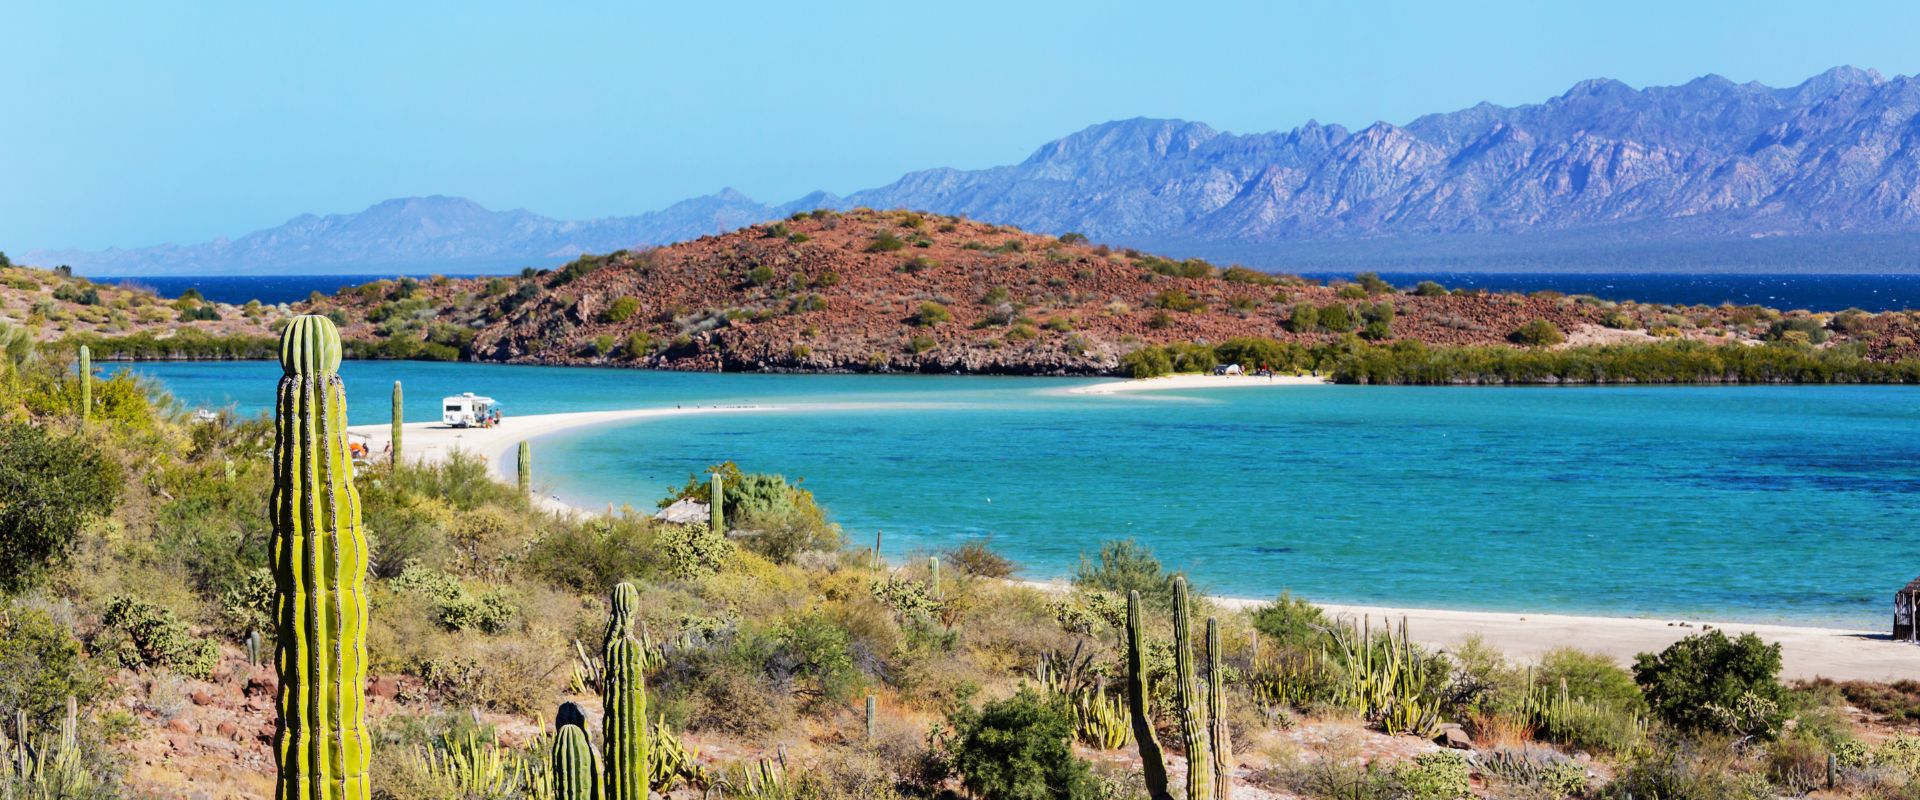 26 Best Things to Do in Baja California Sur, Mexico - Pirate ...